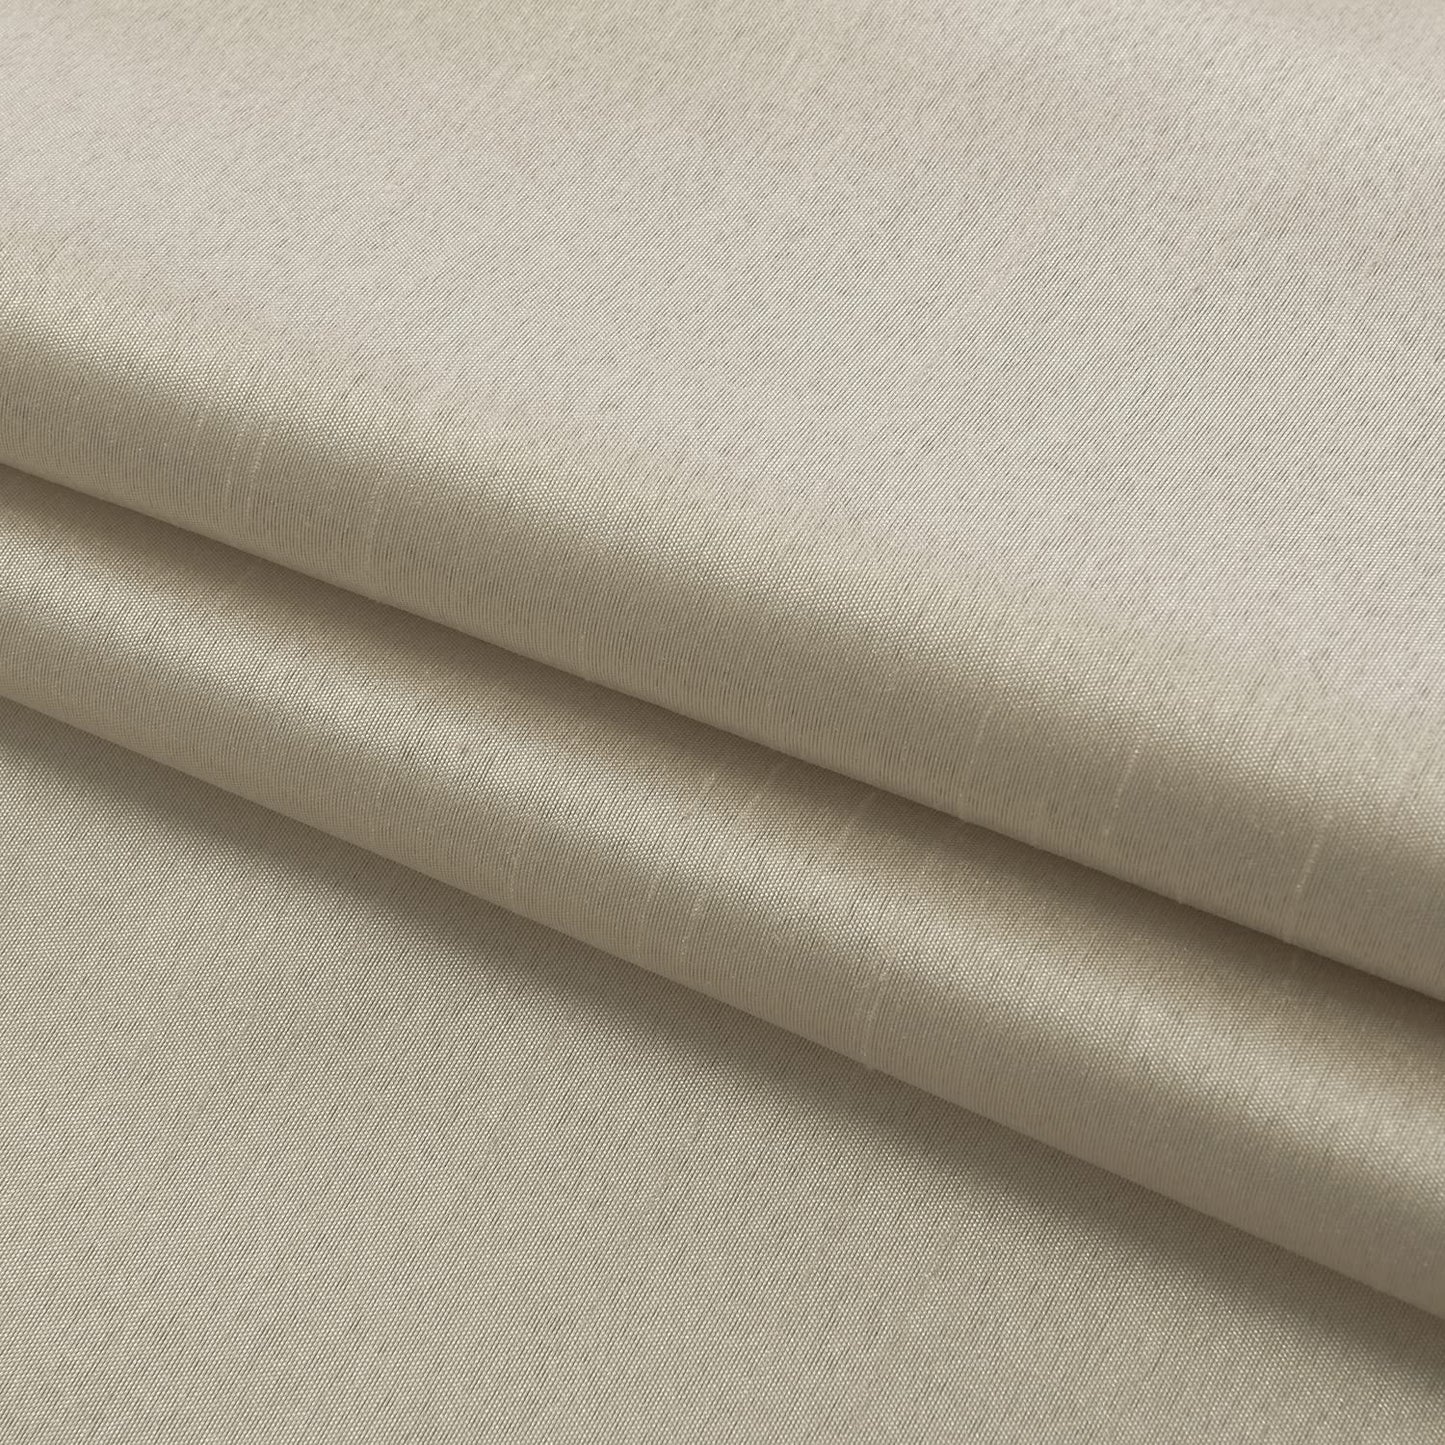 Light Gold Faux Silk Room-Darkening Blackout Curtains with Beige Liner(Sold By Pair)